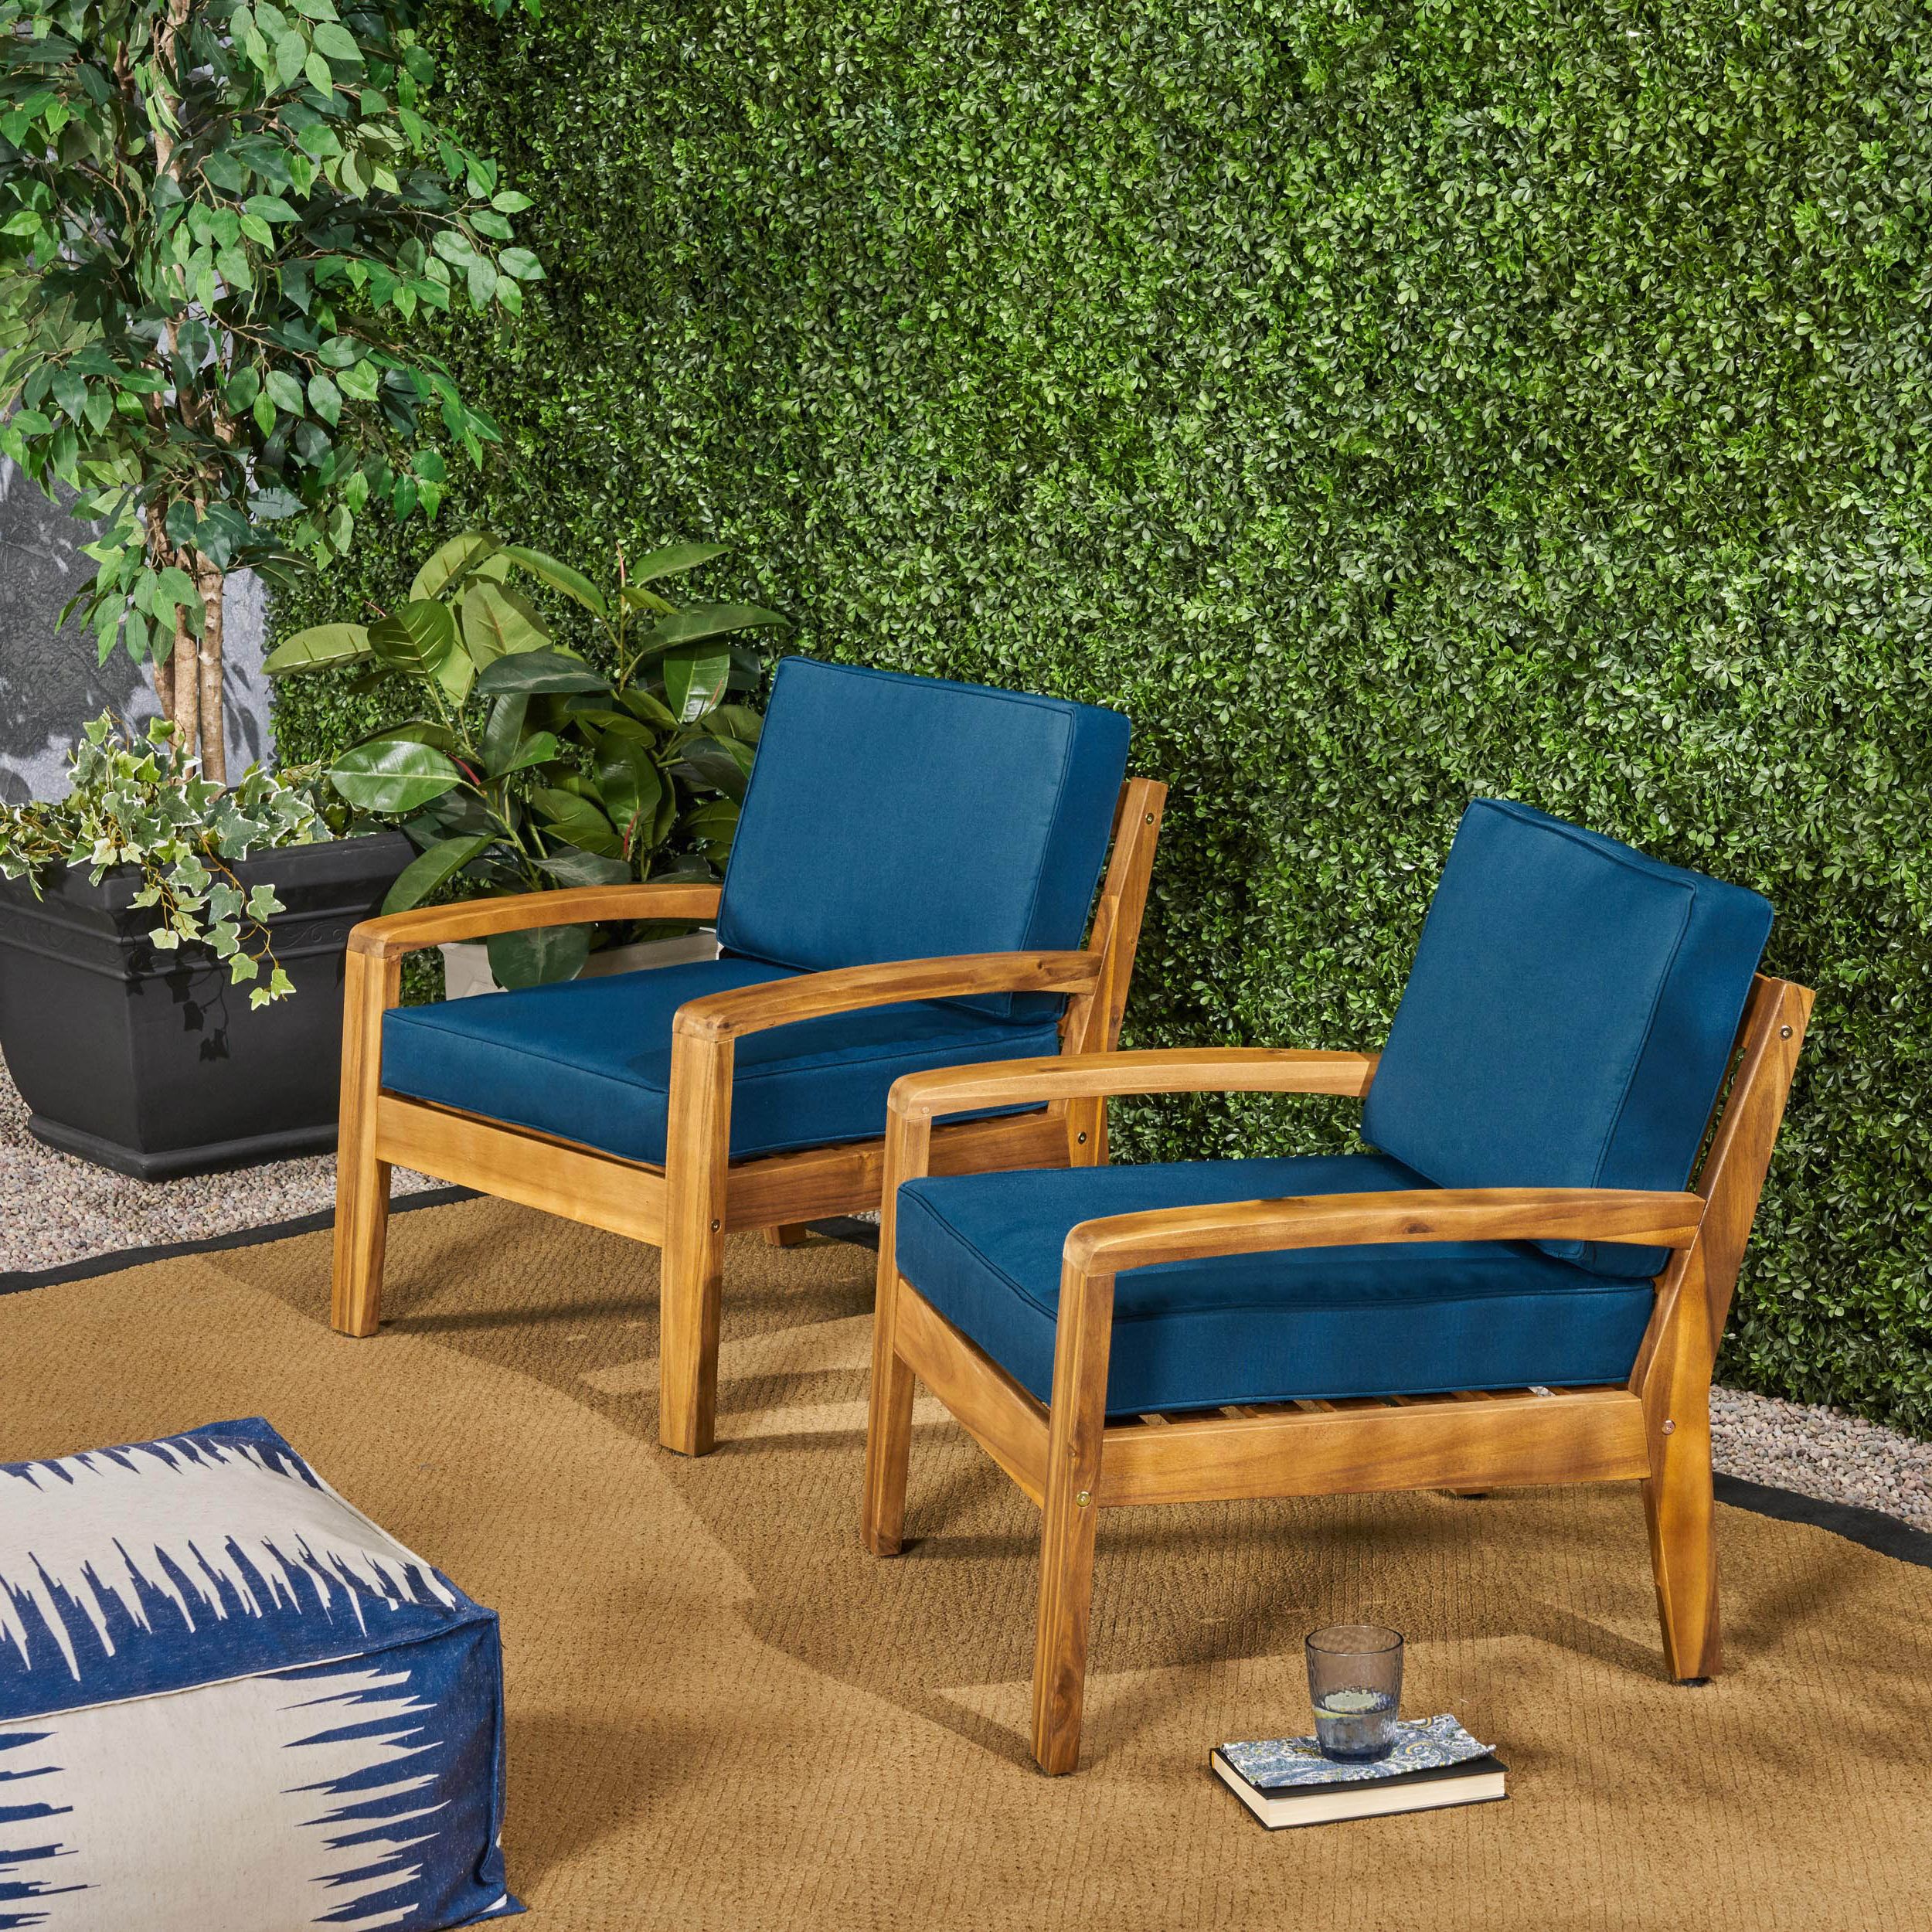 Teak Outdoor Loungers Sets Throughout Recent Wilcox Outdoor Acacia Wood Club Chairs With Cushions (set Of 2), Teak (View 9 of 15)